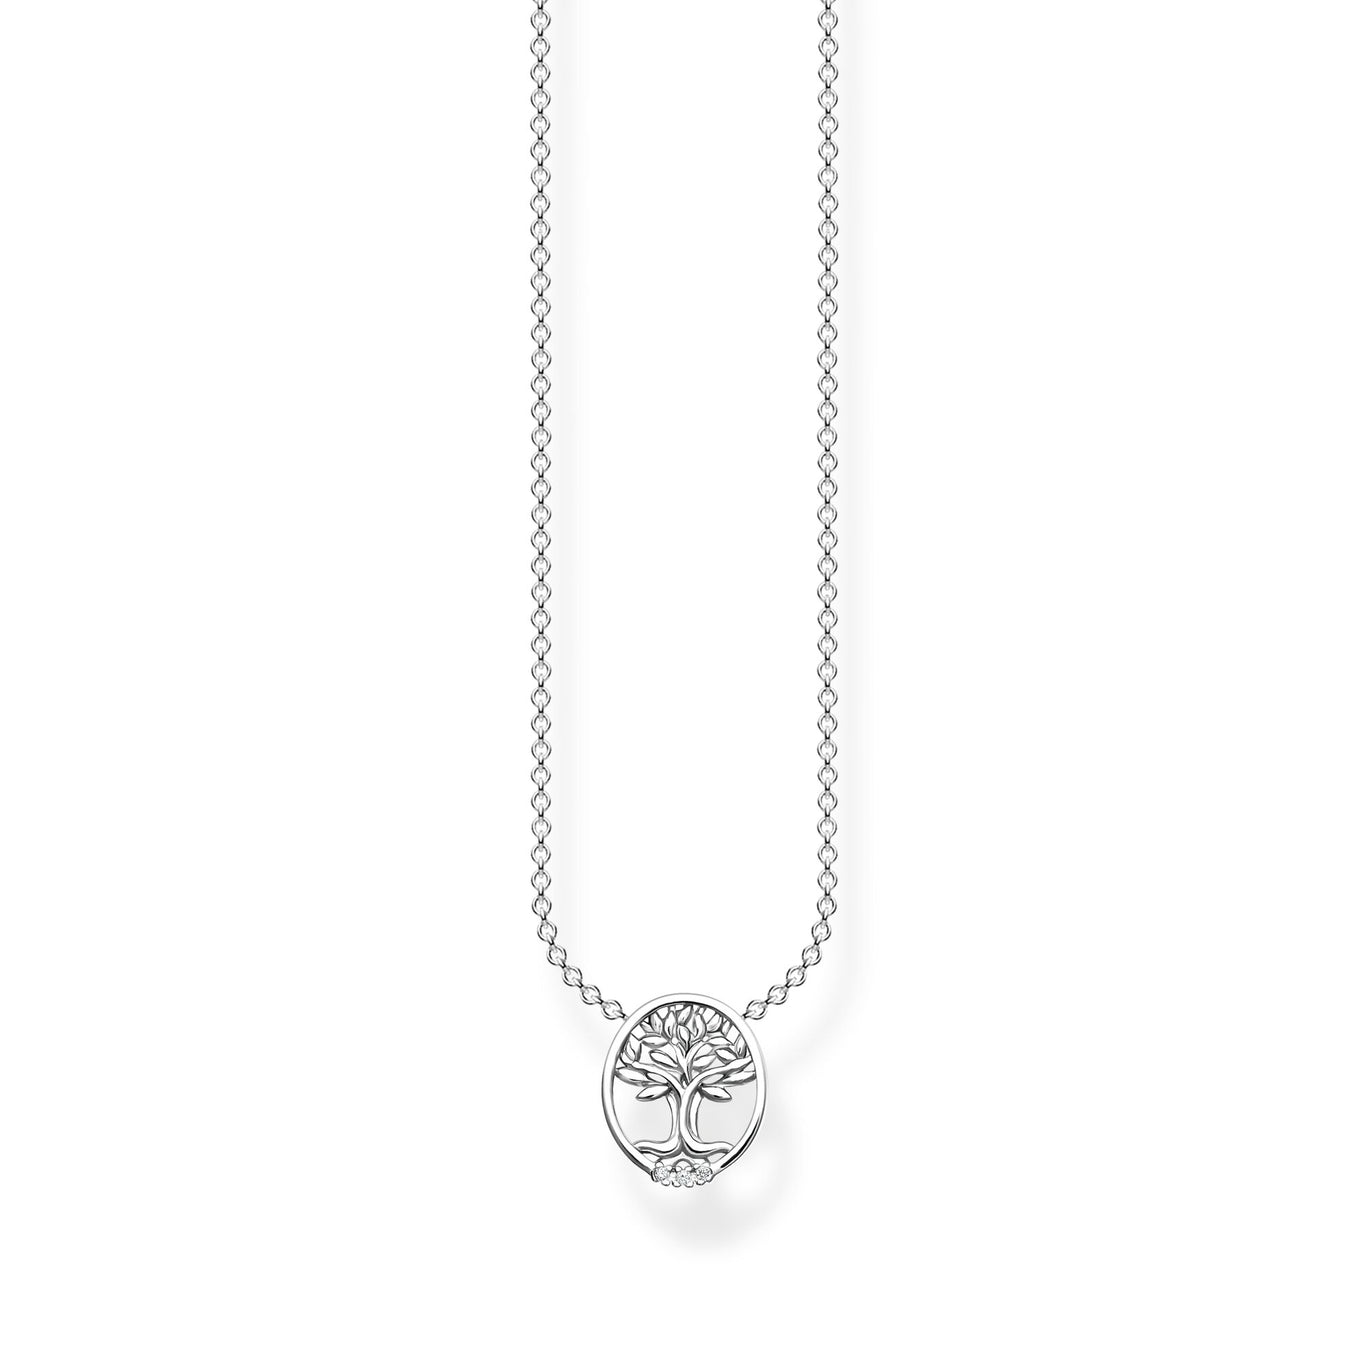 Thomas Sabo Tree of Love with White Stones Necklace